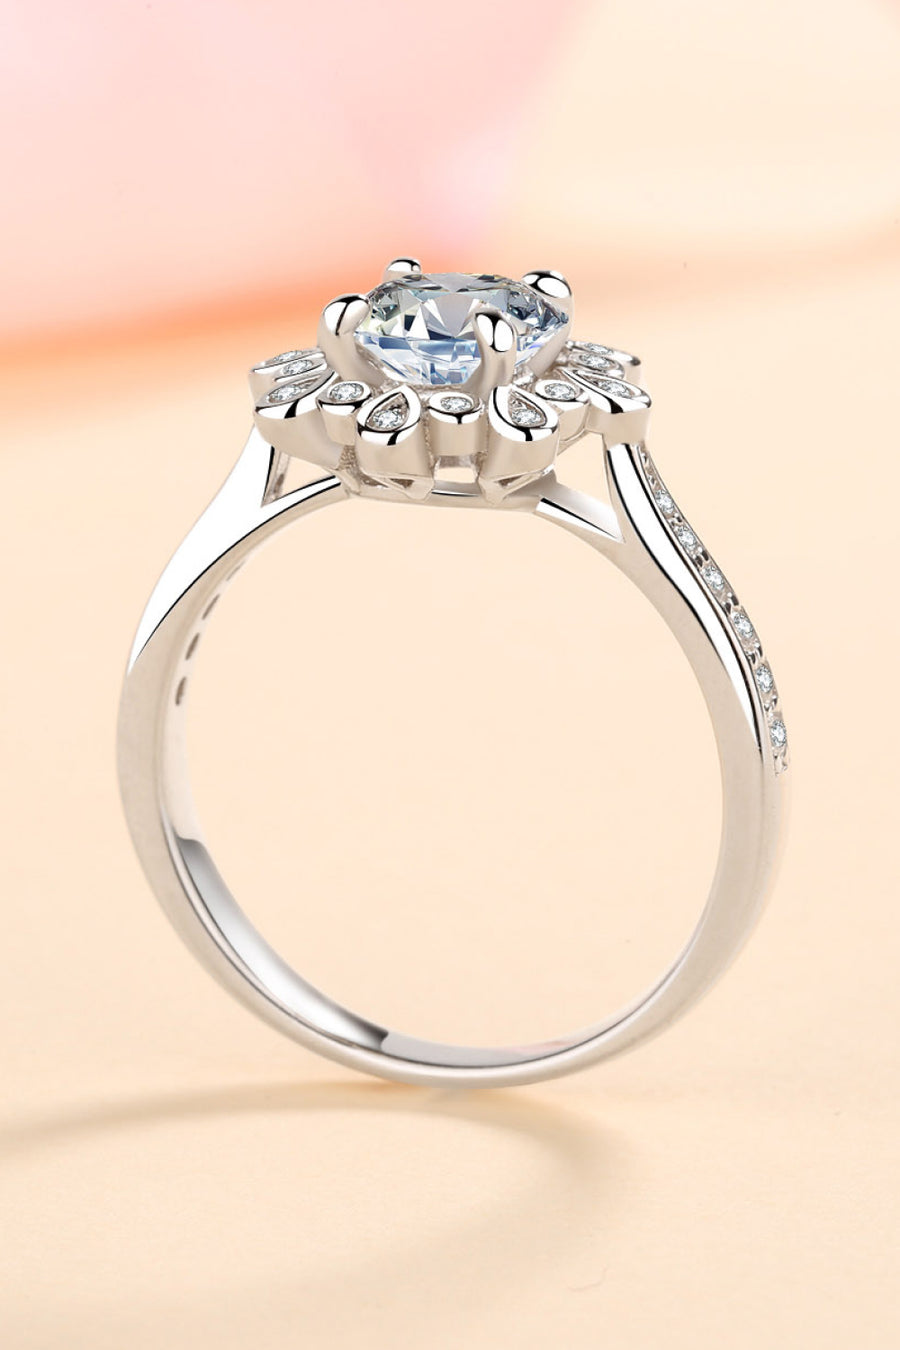 Can't Stop Your Shine, 925 Sterling Silver, Moissanite, Ring, Jewelry, Fashion, Accessories, Style, Elegant, Statement Piece